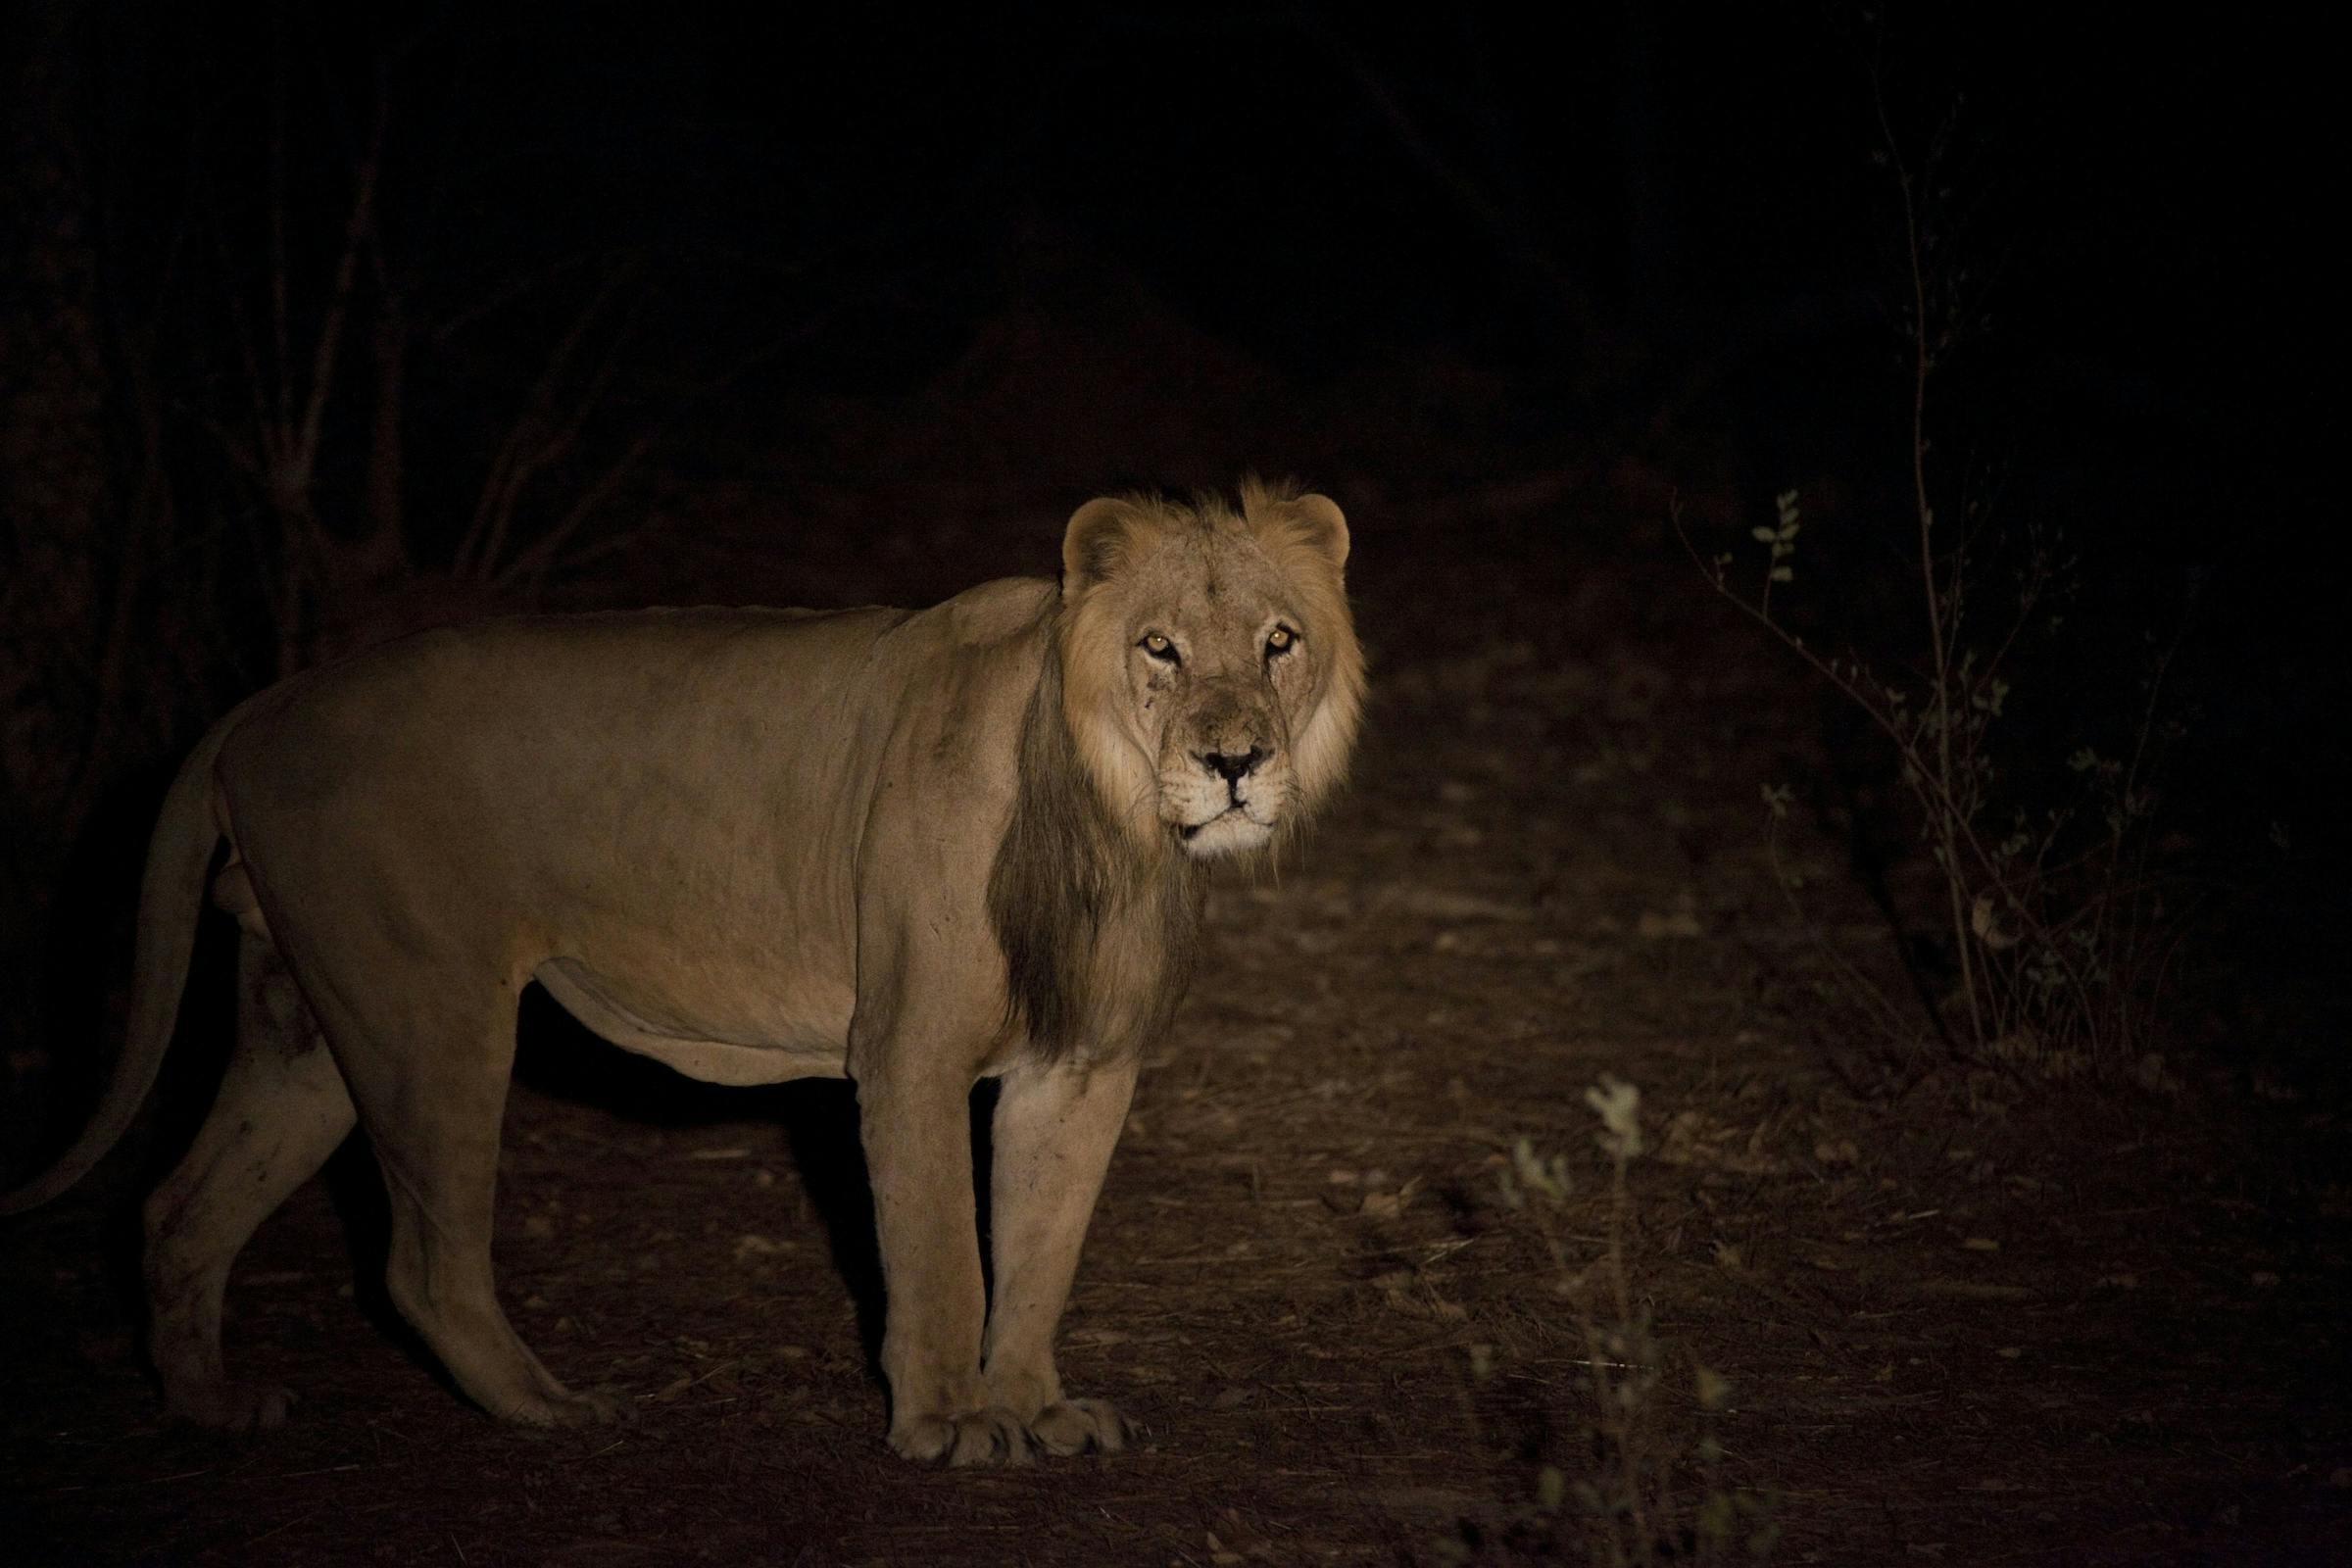 West African Lions Recovering from the Brink